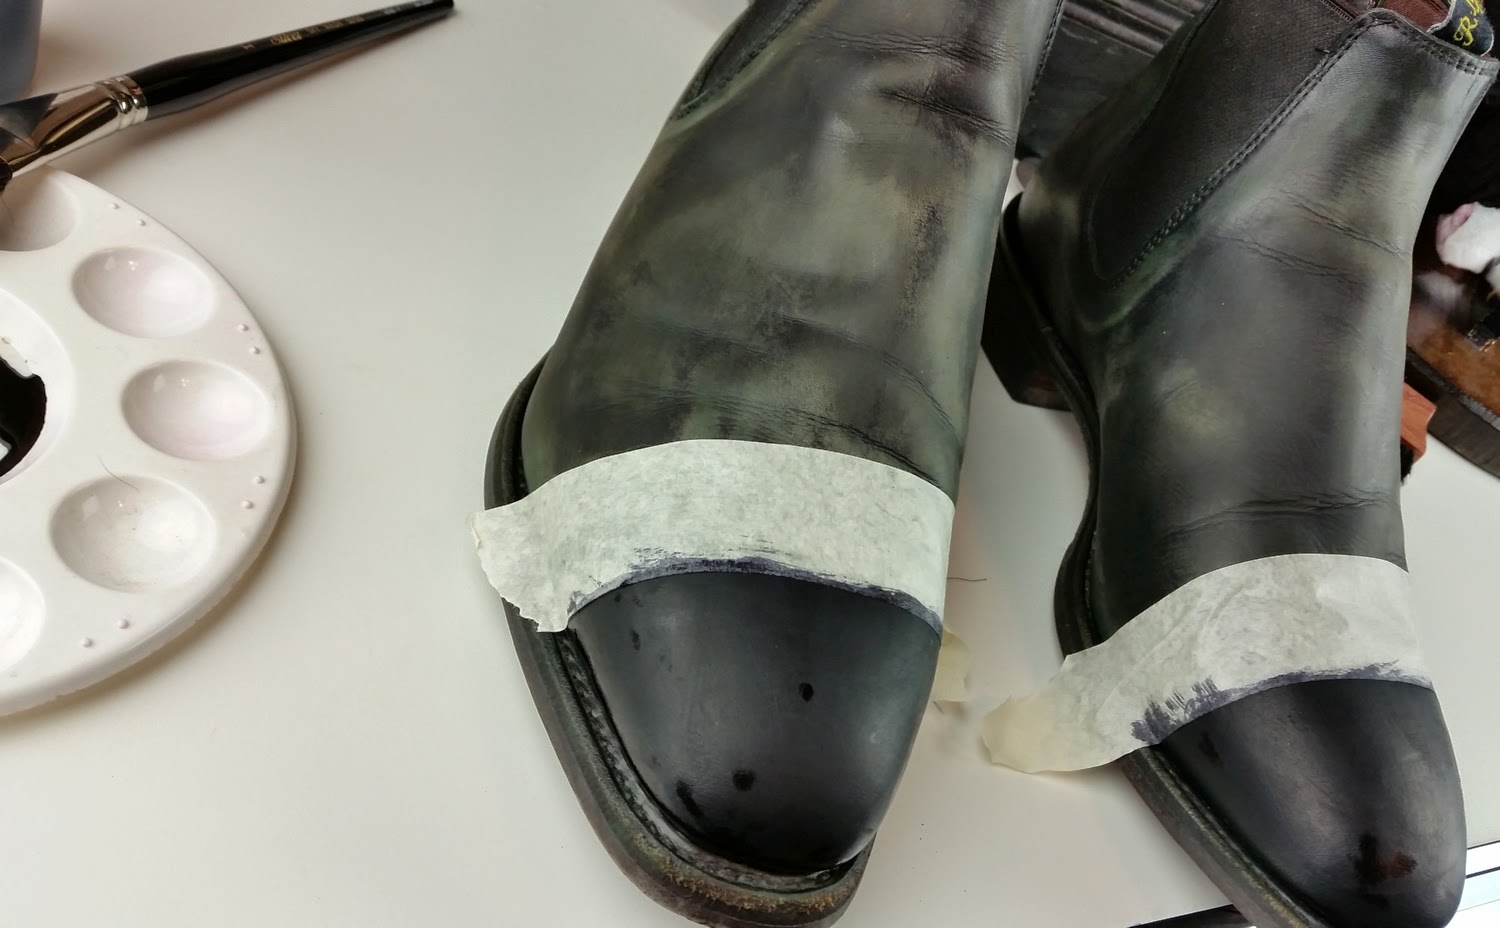 RM Williams black Chelsea boots, gently worn